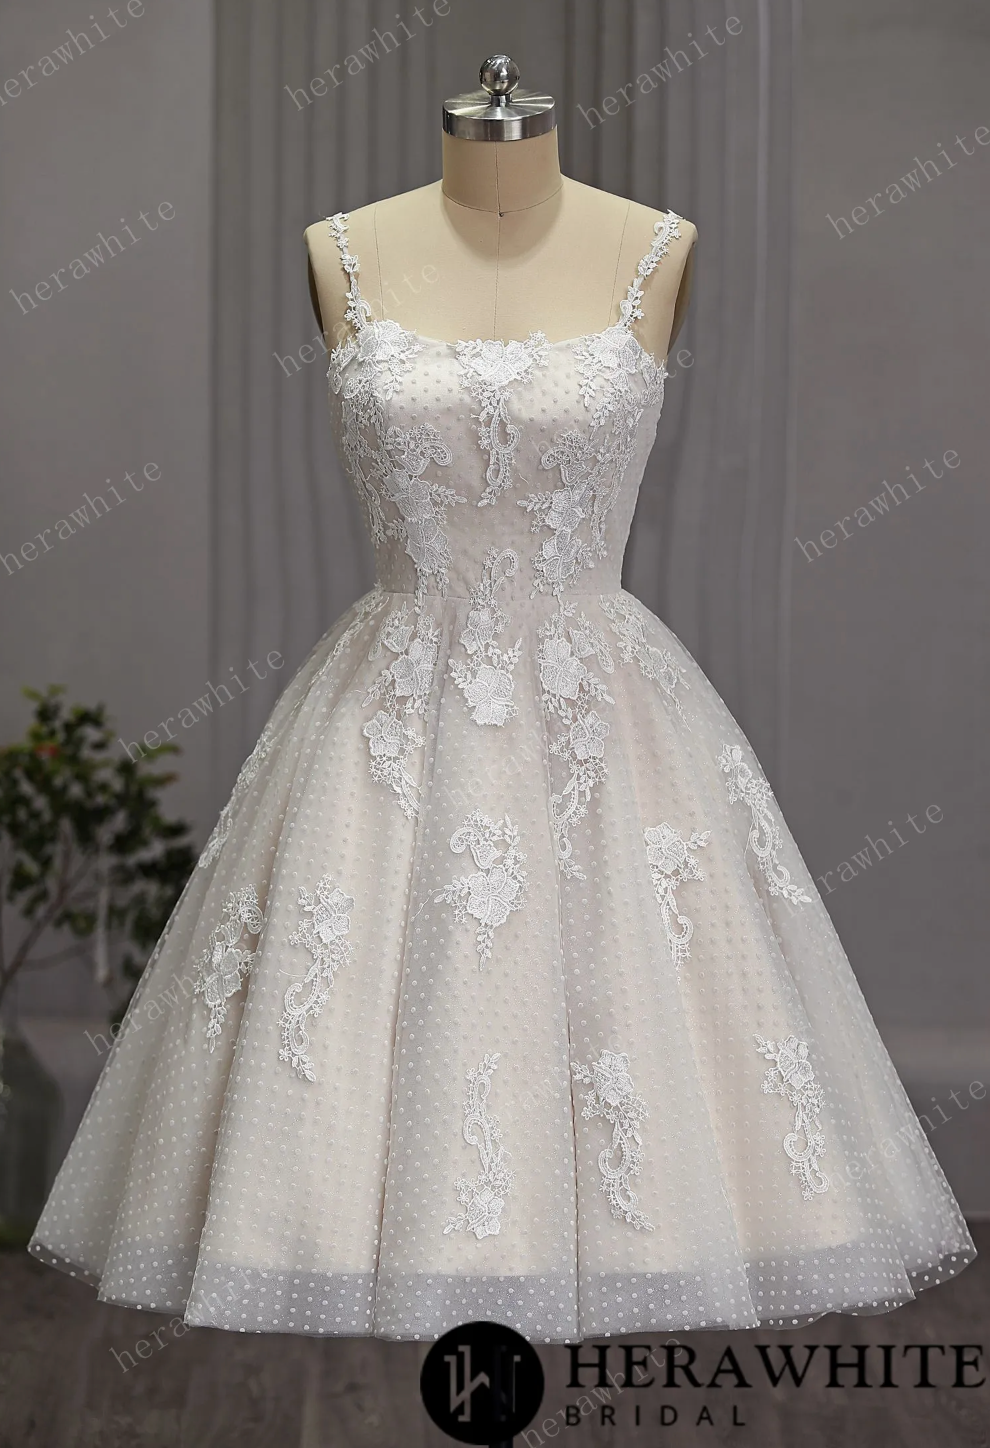 Short Tulle Ballgown Polka Dots Wedding Dress with Straps